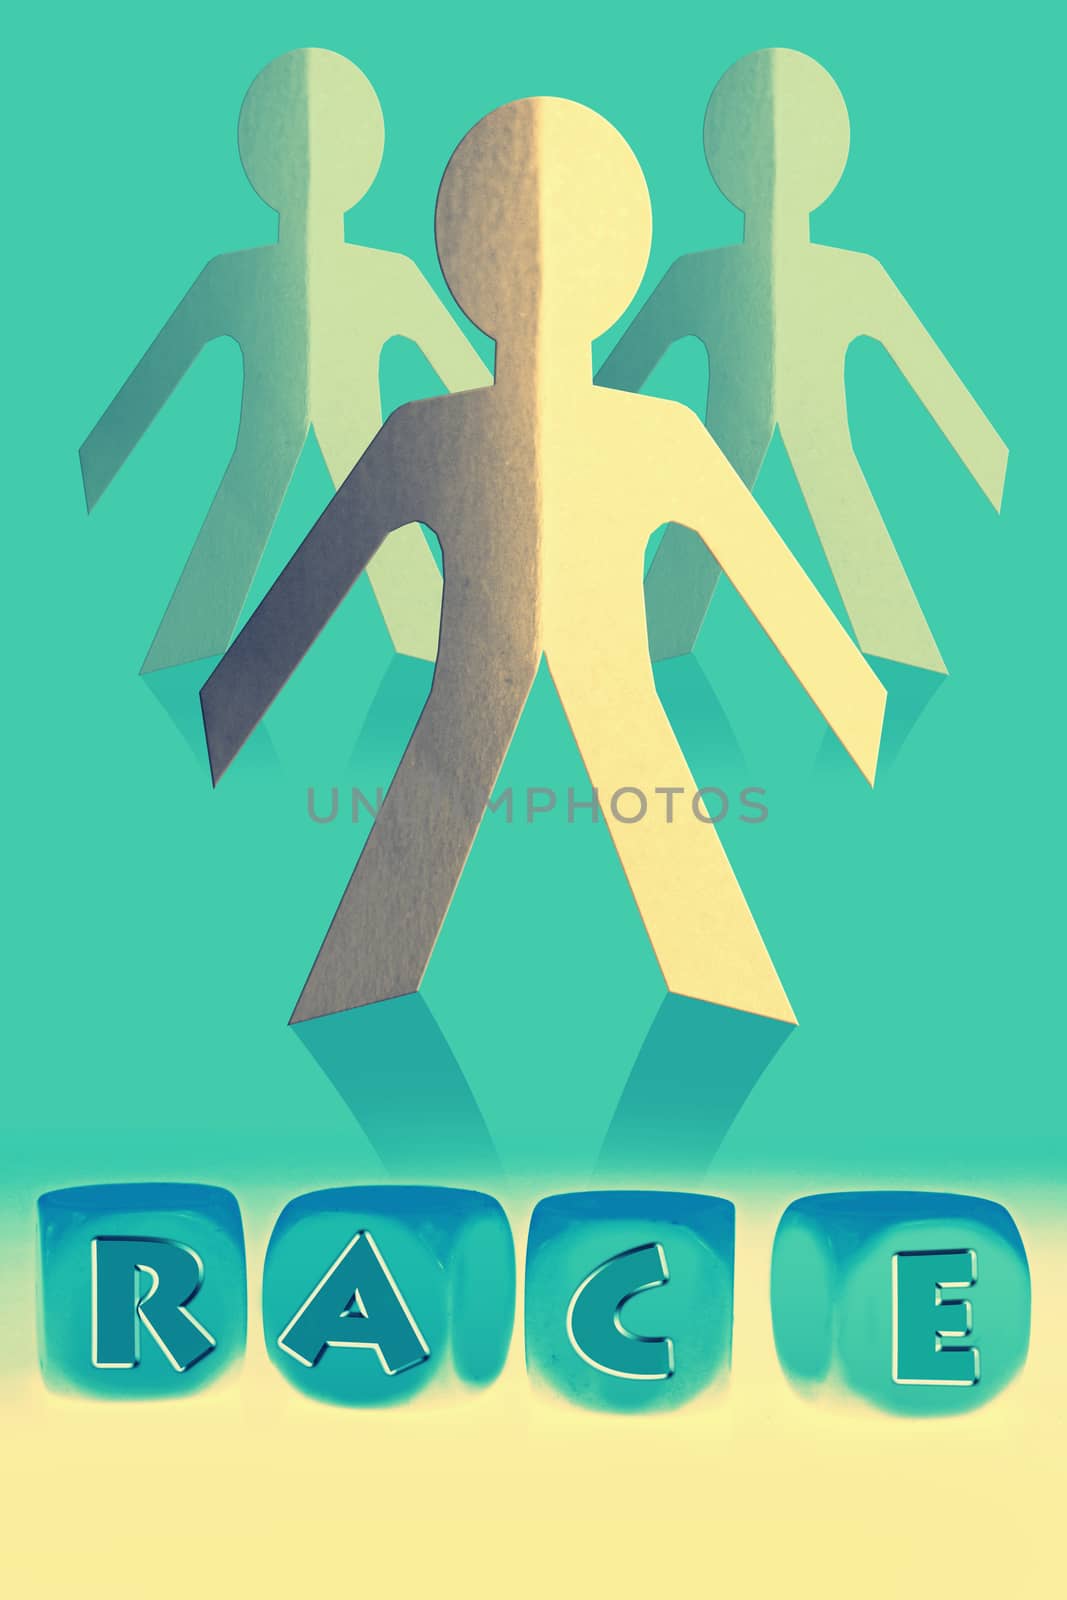 Race, Competition Concept by yands